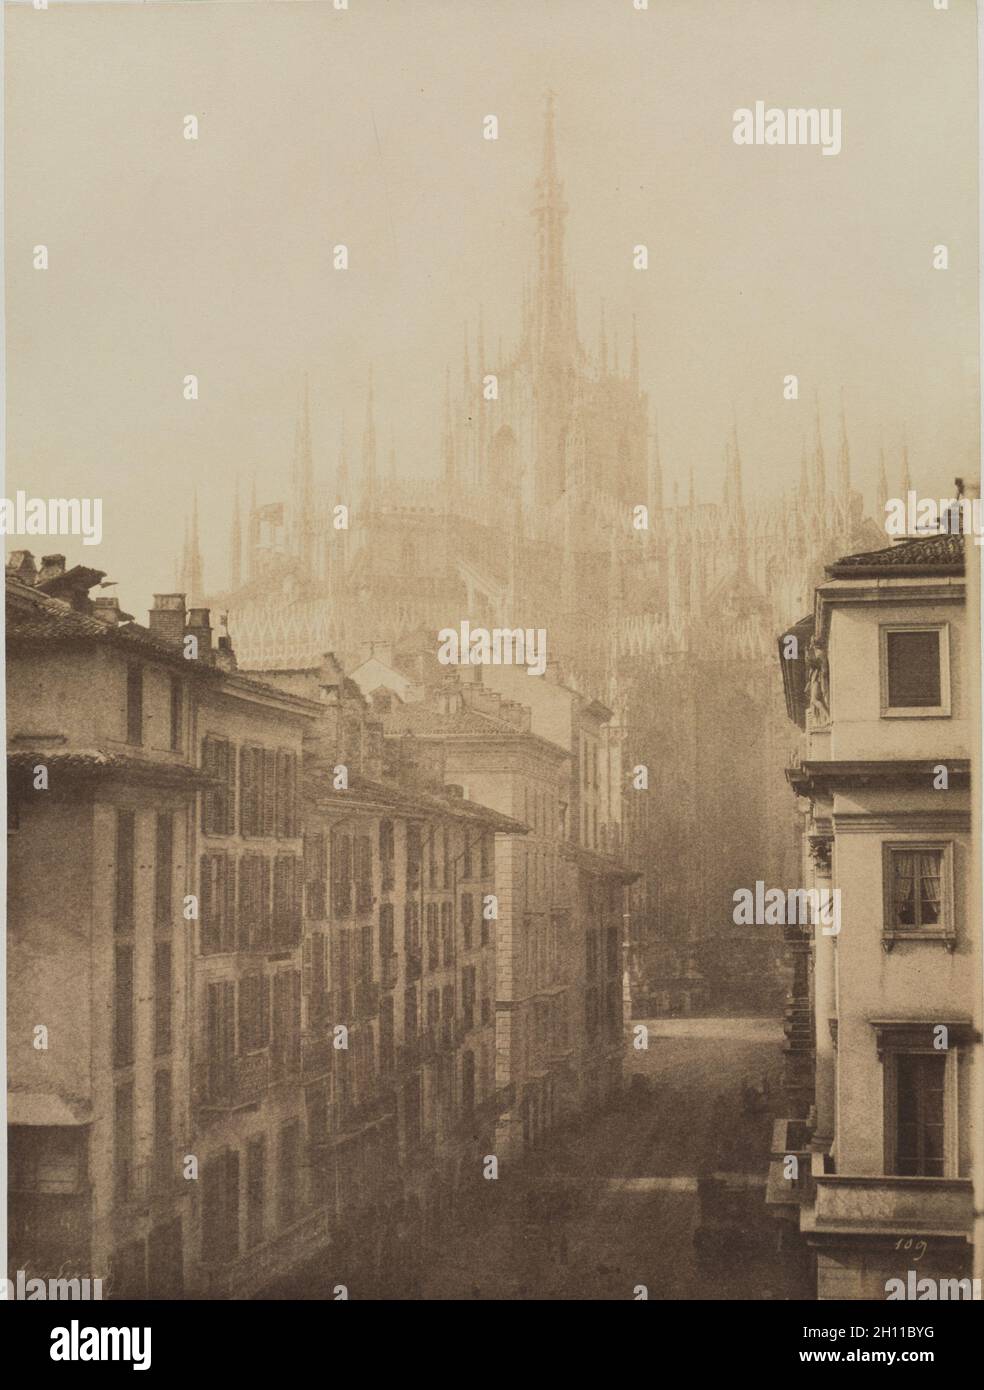 Cathedral from Corso Francesco, Milan, 1857. Léon Gérard (French). Albumen print from wax paper negative; image: 35.9 x 26.8 cm (14 1/8 x 10 9/16 in.); matted: 66 x 55.9 cm (26 x 22 in.). Stock Photo